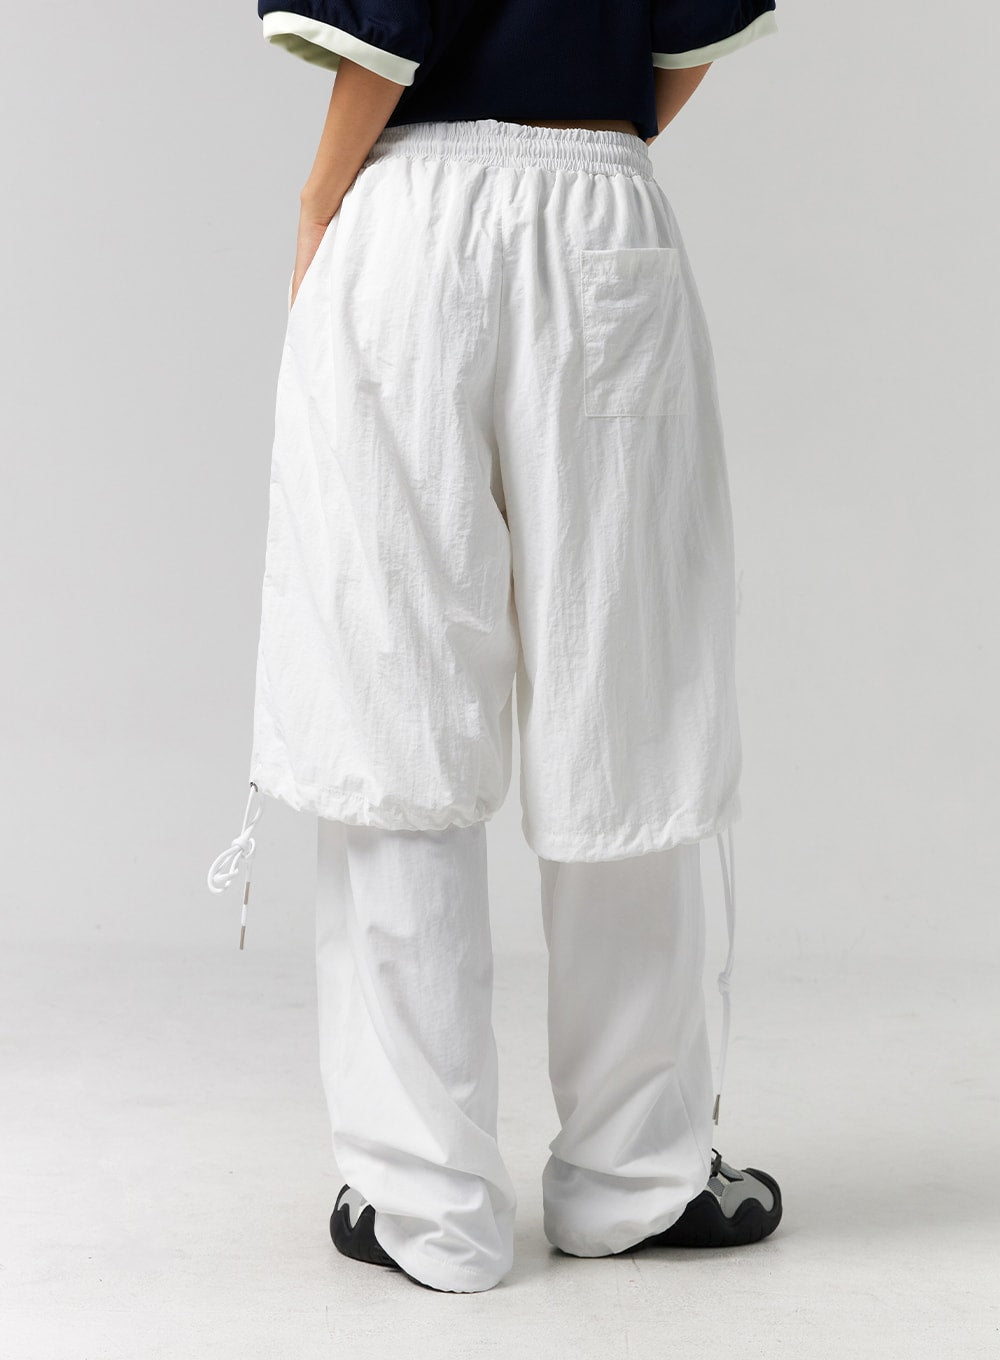 Wide Fit Parachute pants with 20% discount!